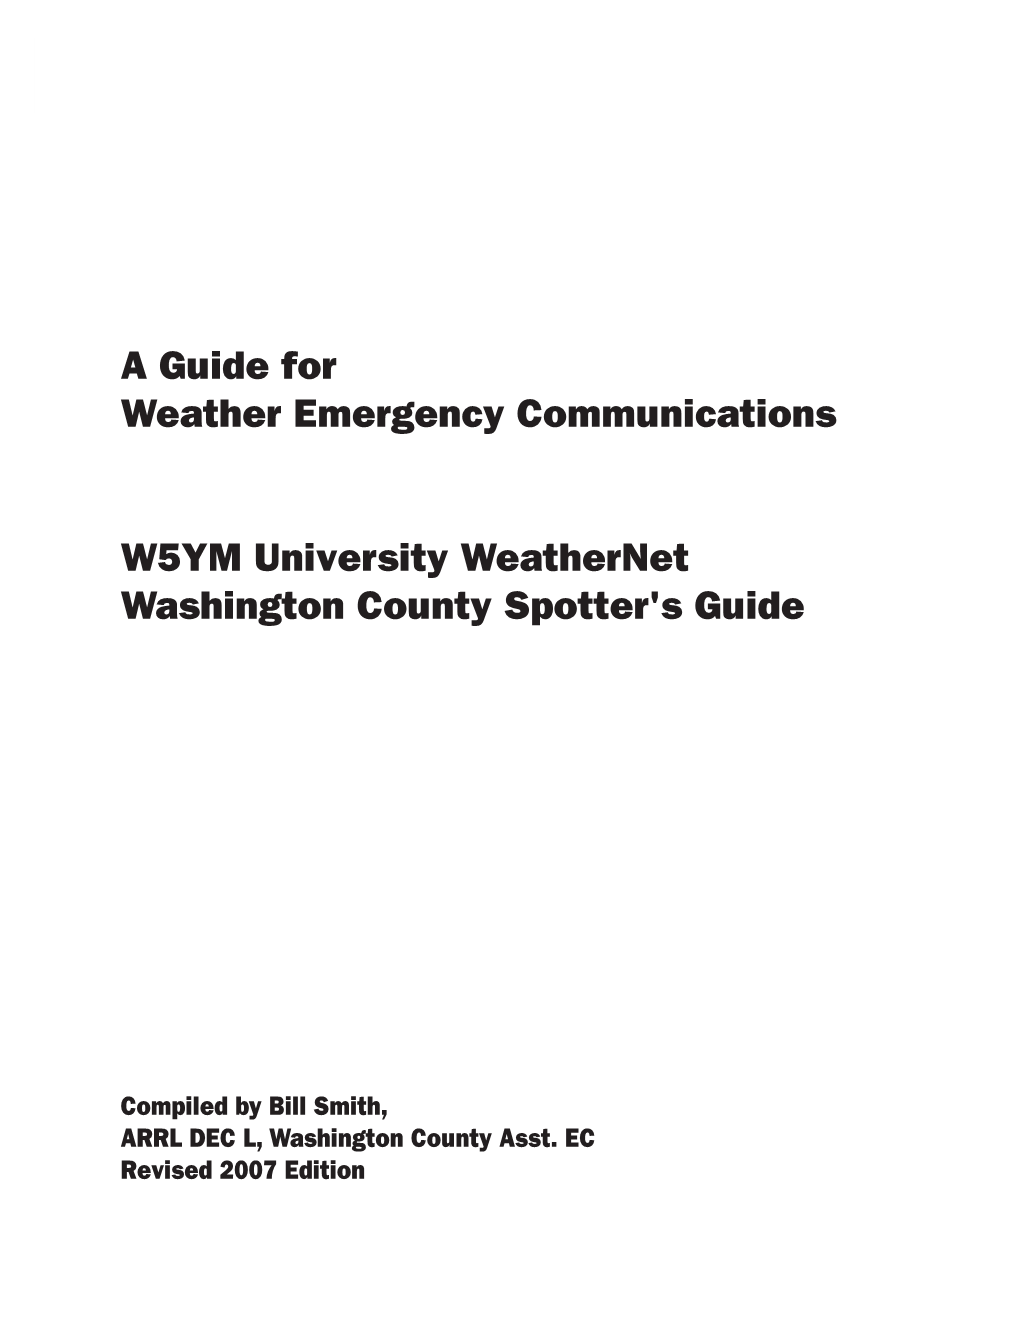 A Guide for Weather Emergency Communications W5YM University